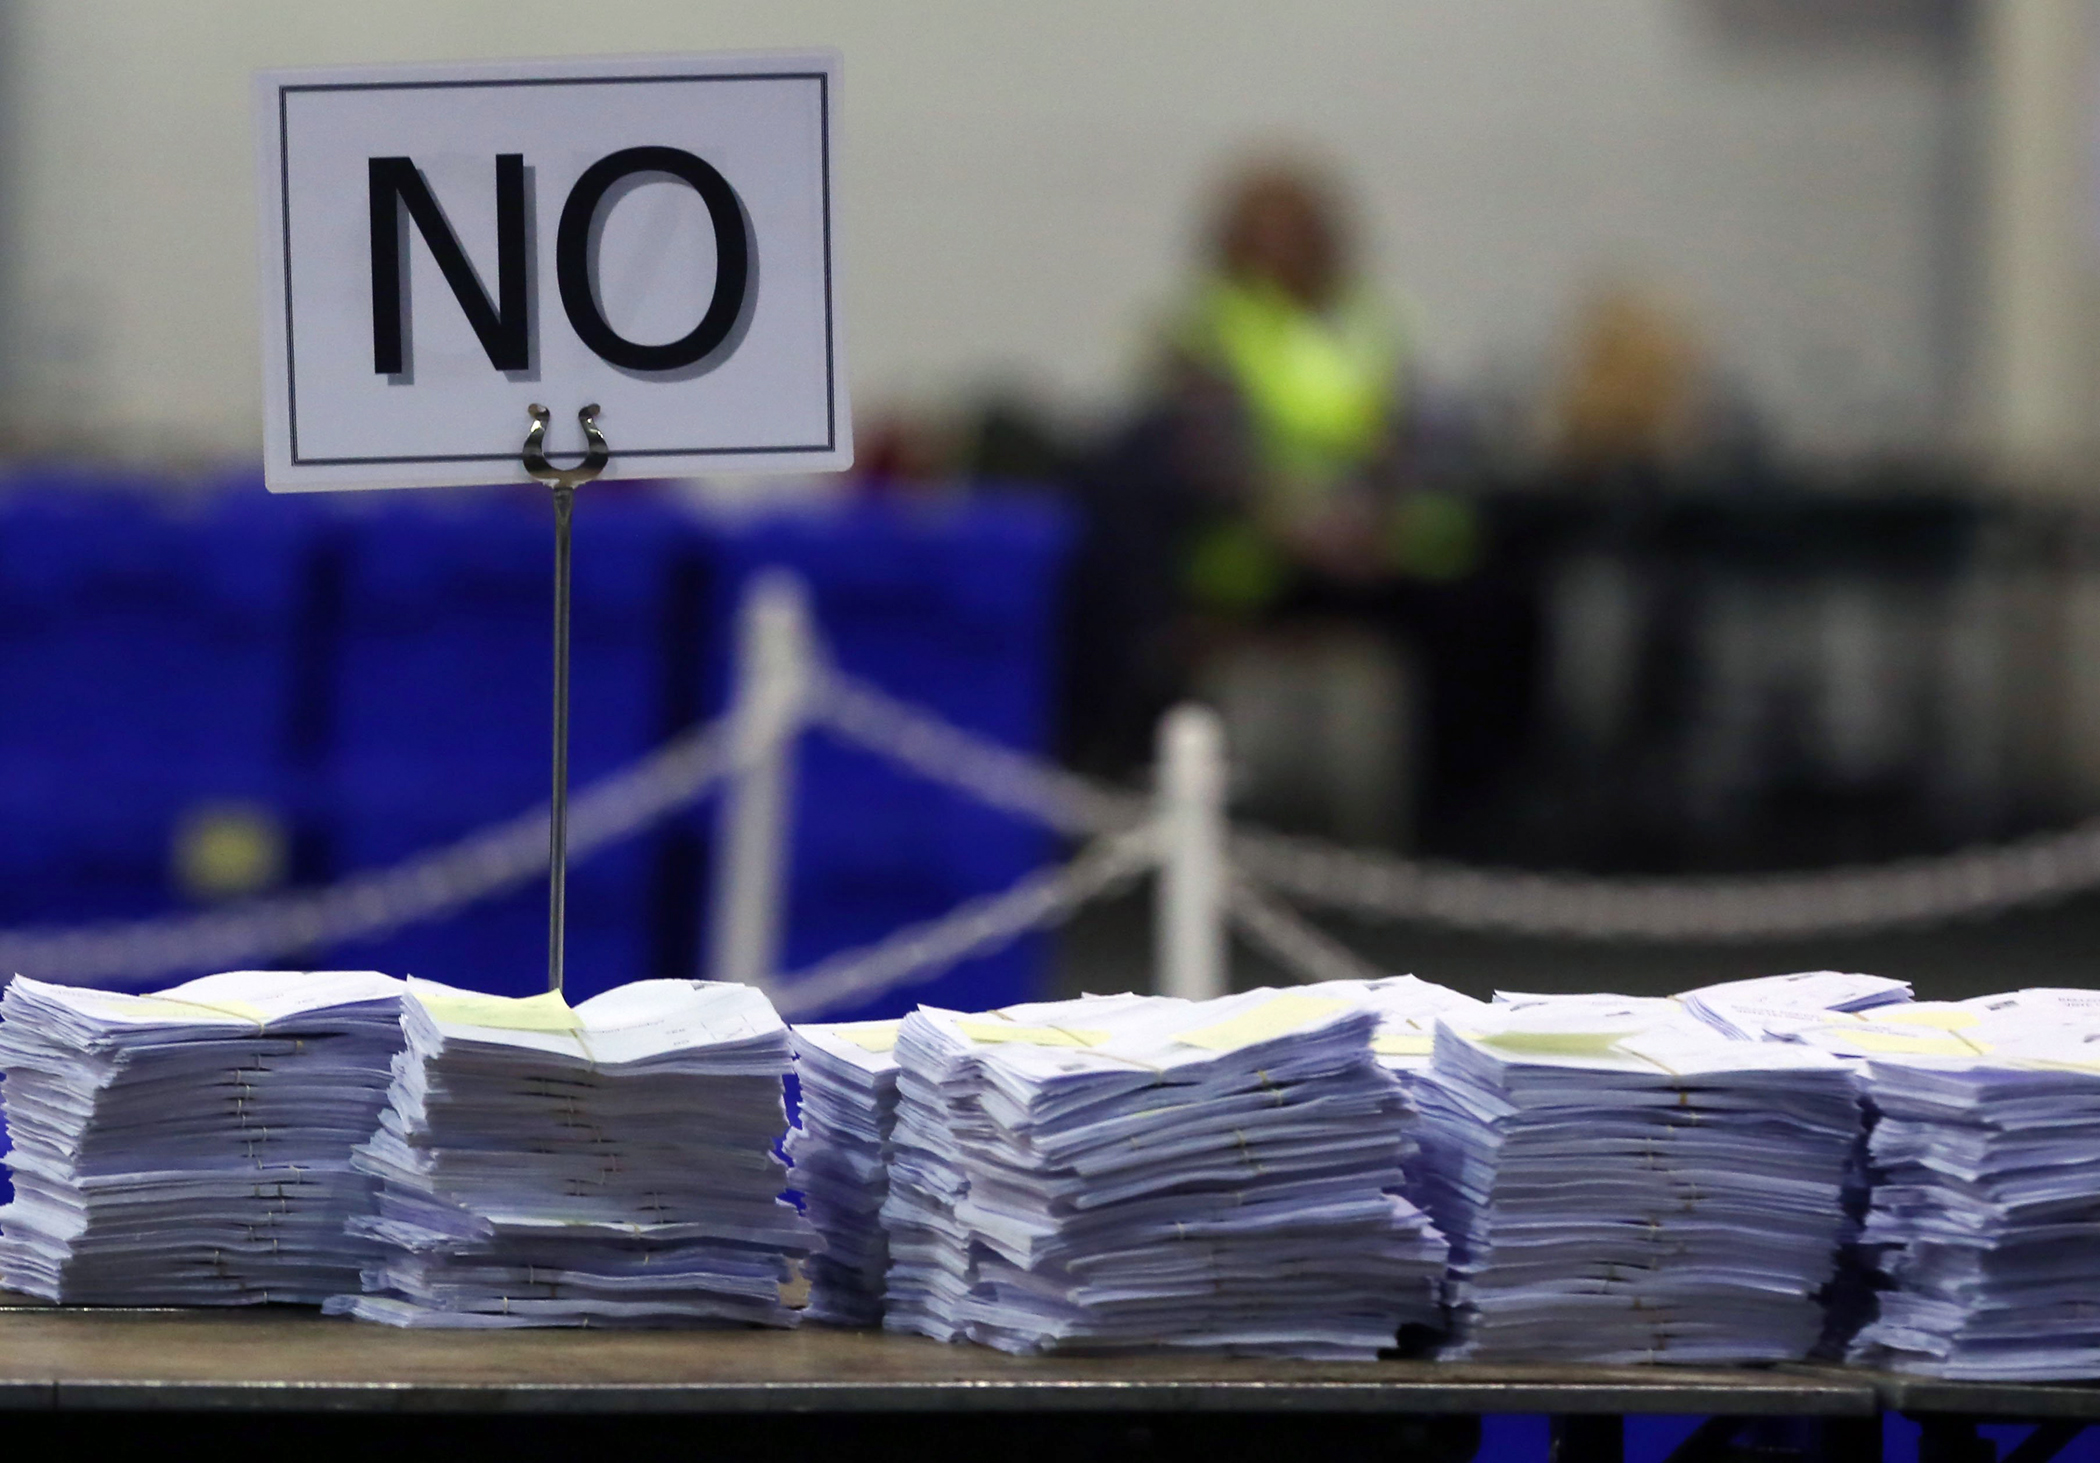 'No' ballots are stacked on a table during the Scottish independence referendum count at the Royal Highland Centre in Edinburgh, Scotland, Sept. 19, 2014.